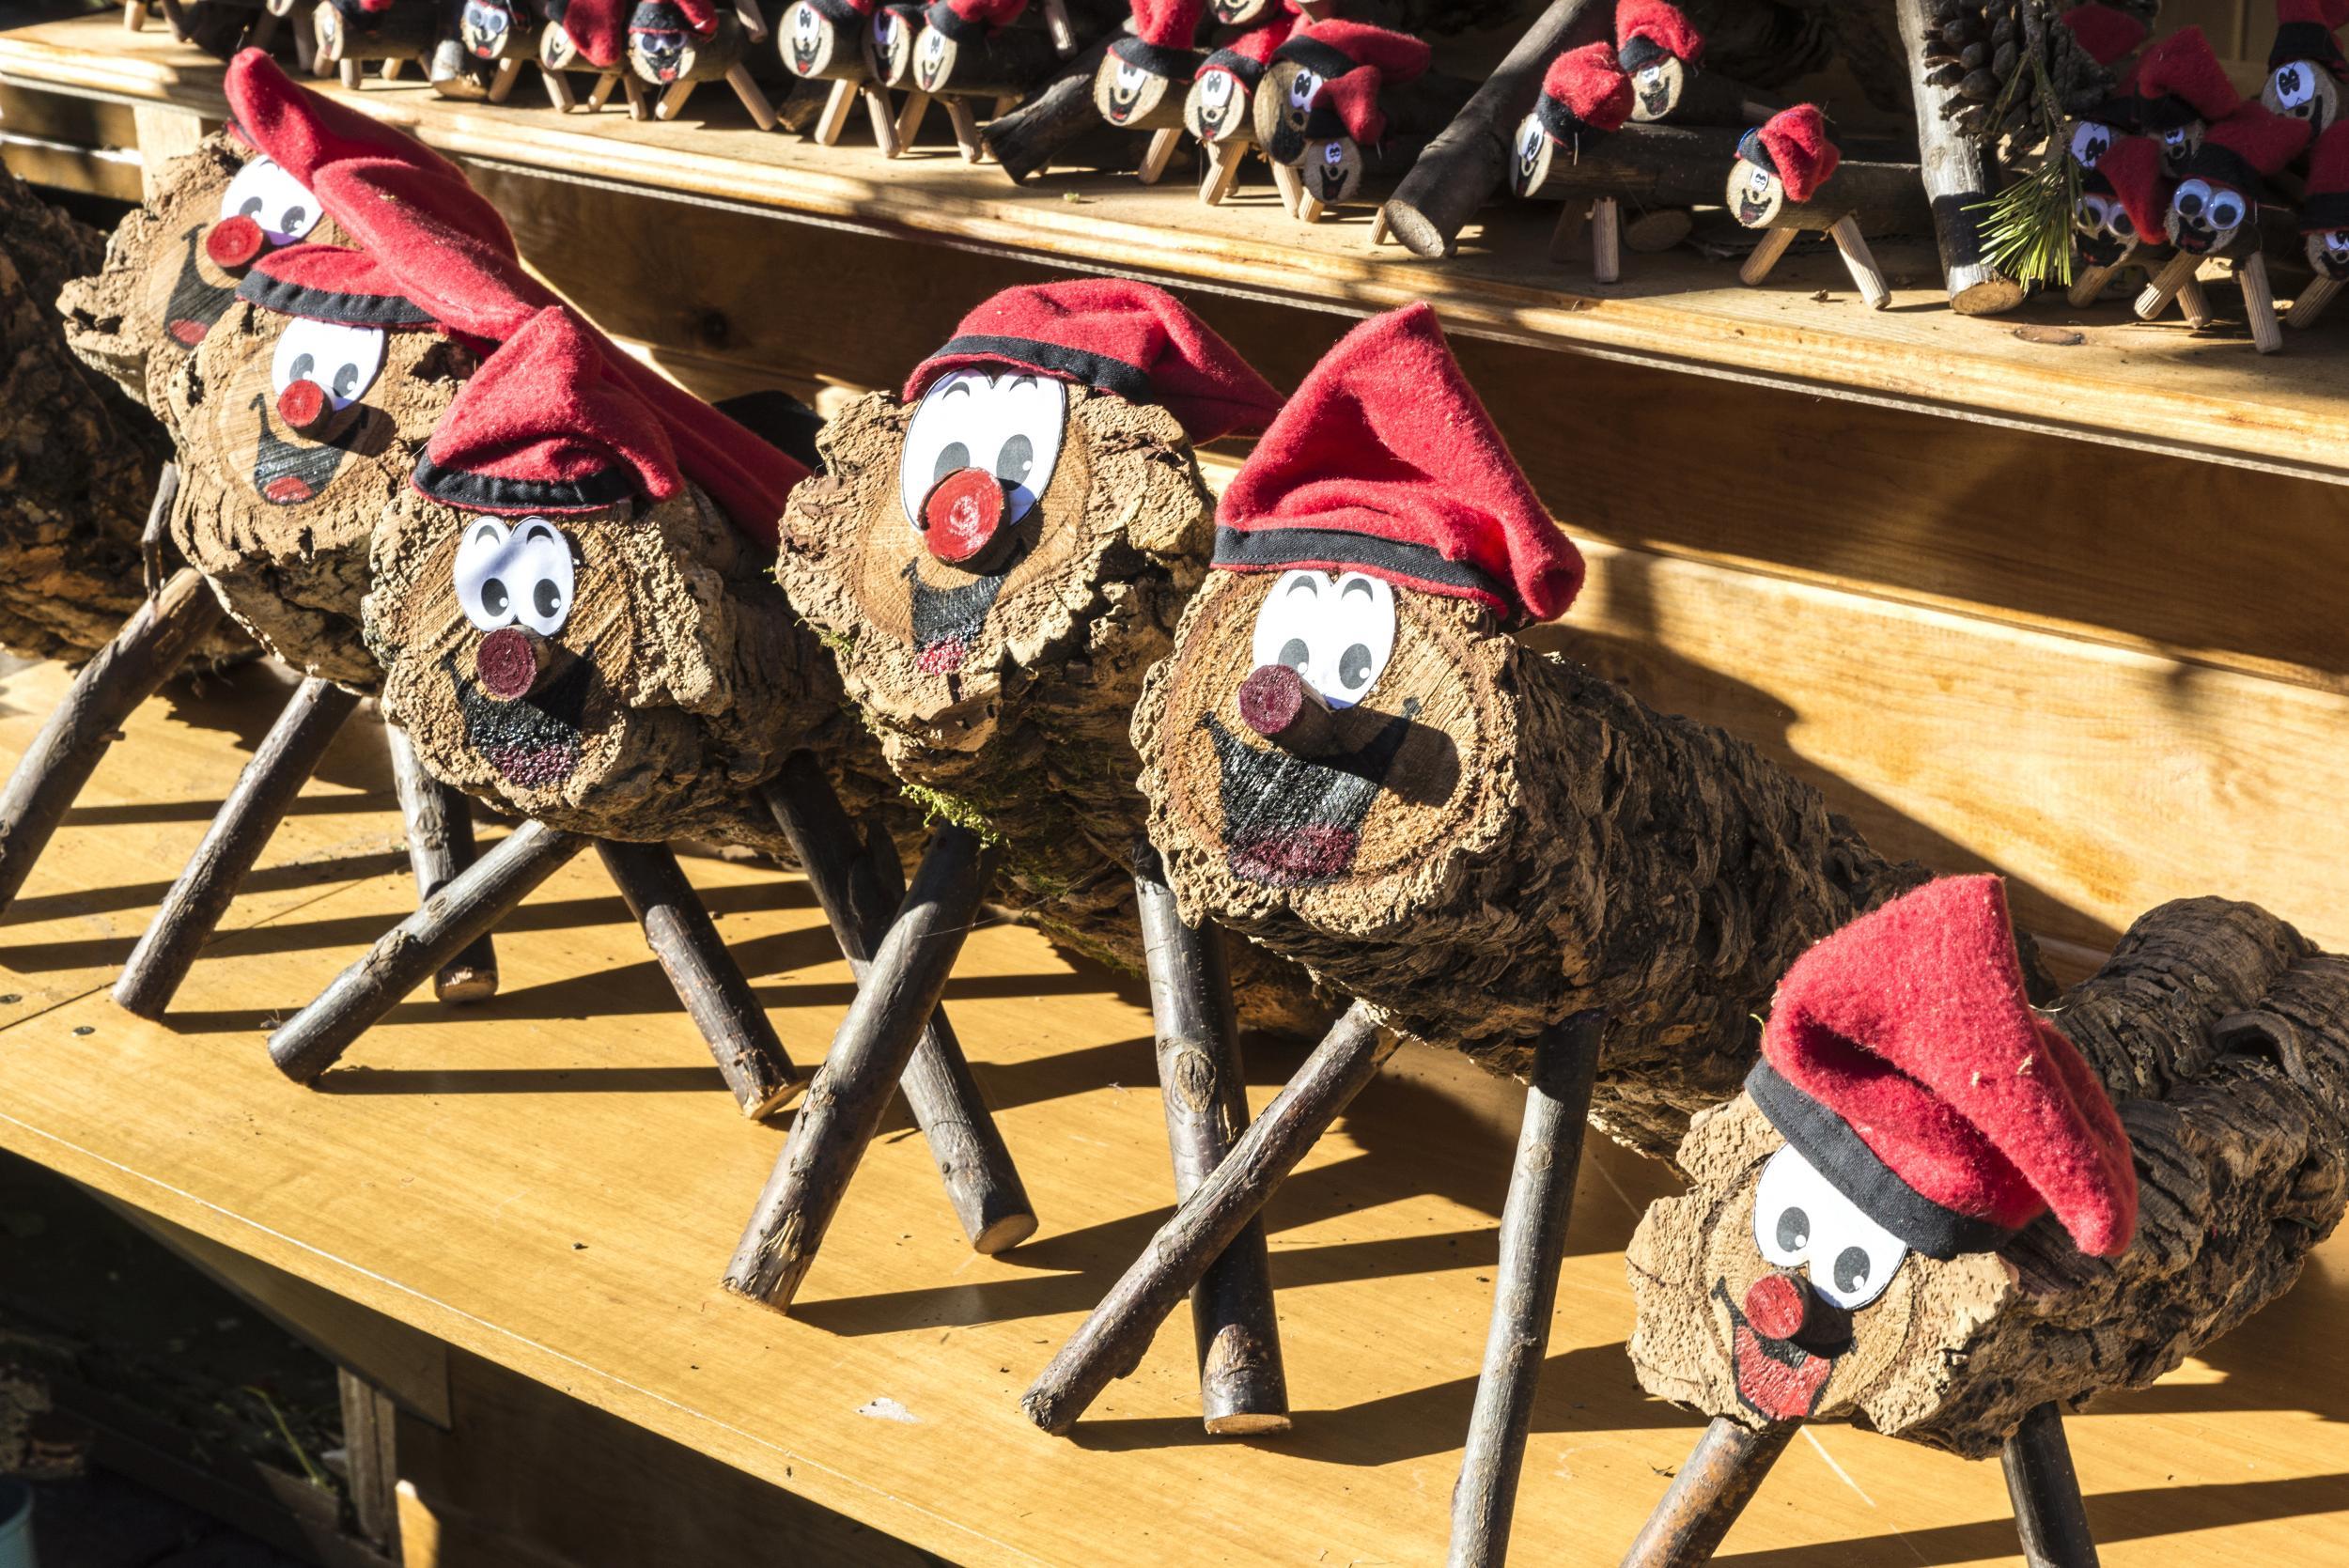 The 'poop log' is a Catalonian Christmas tradition